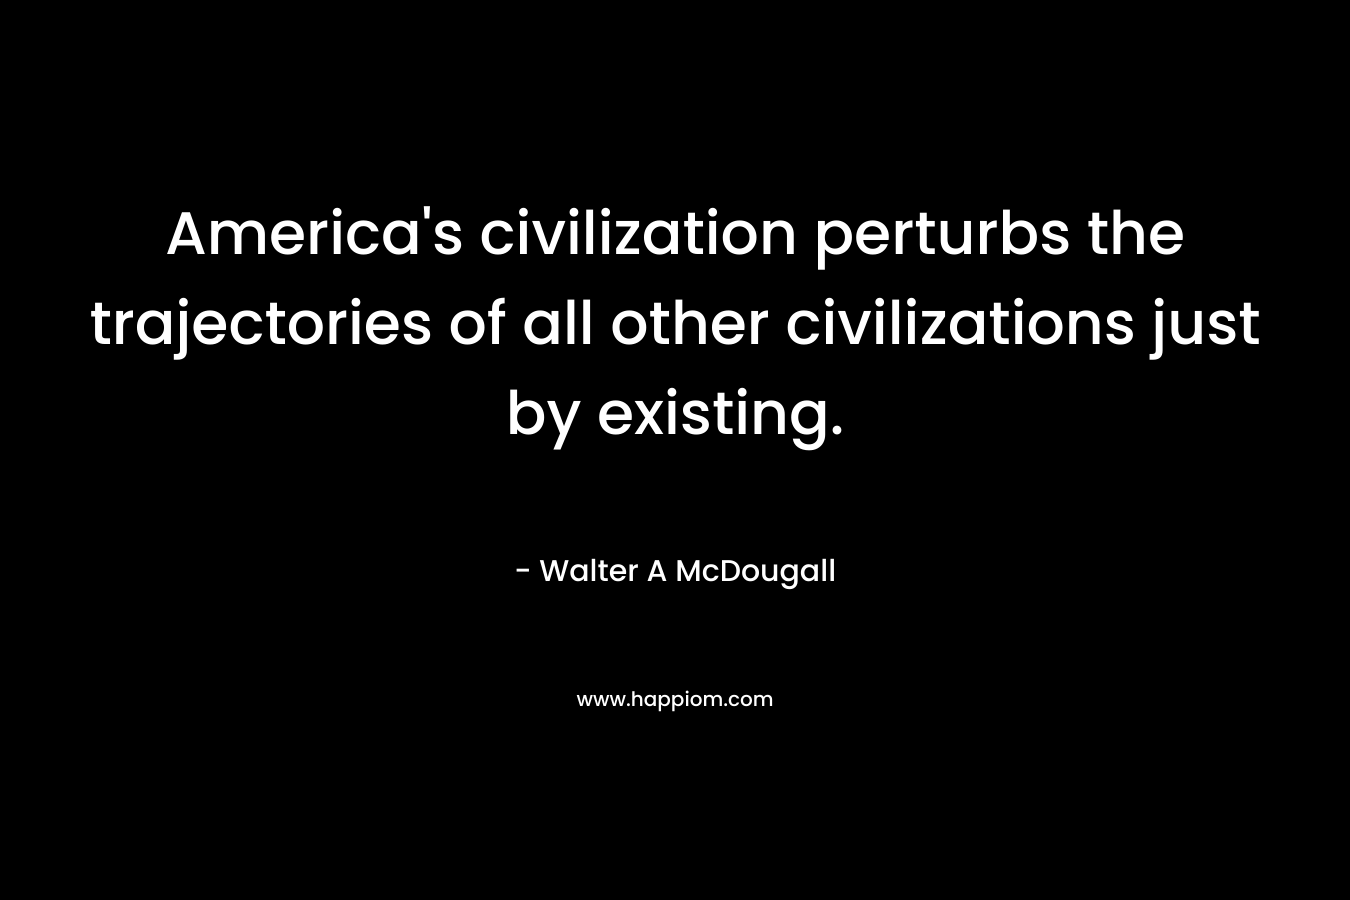 America’s civilization perturbs the trajectories of all other civilizations just by existing. – Walter A McDougall